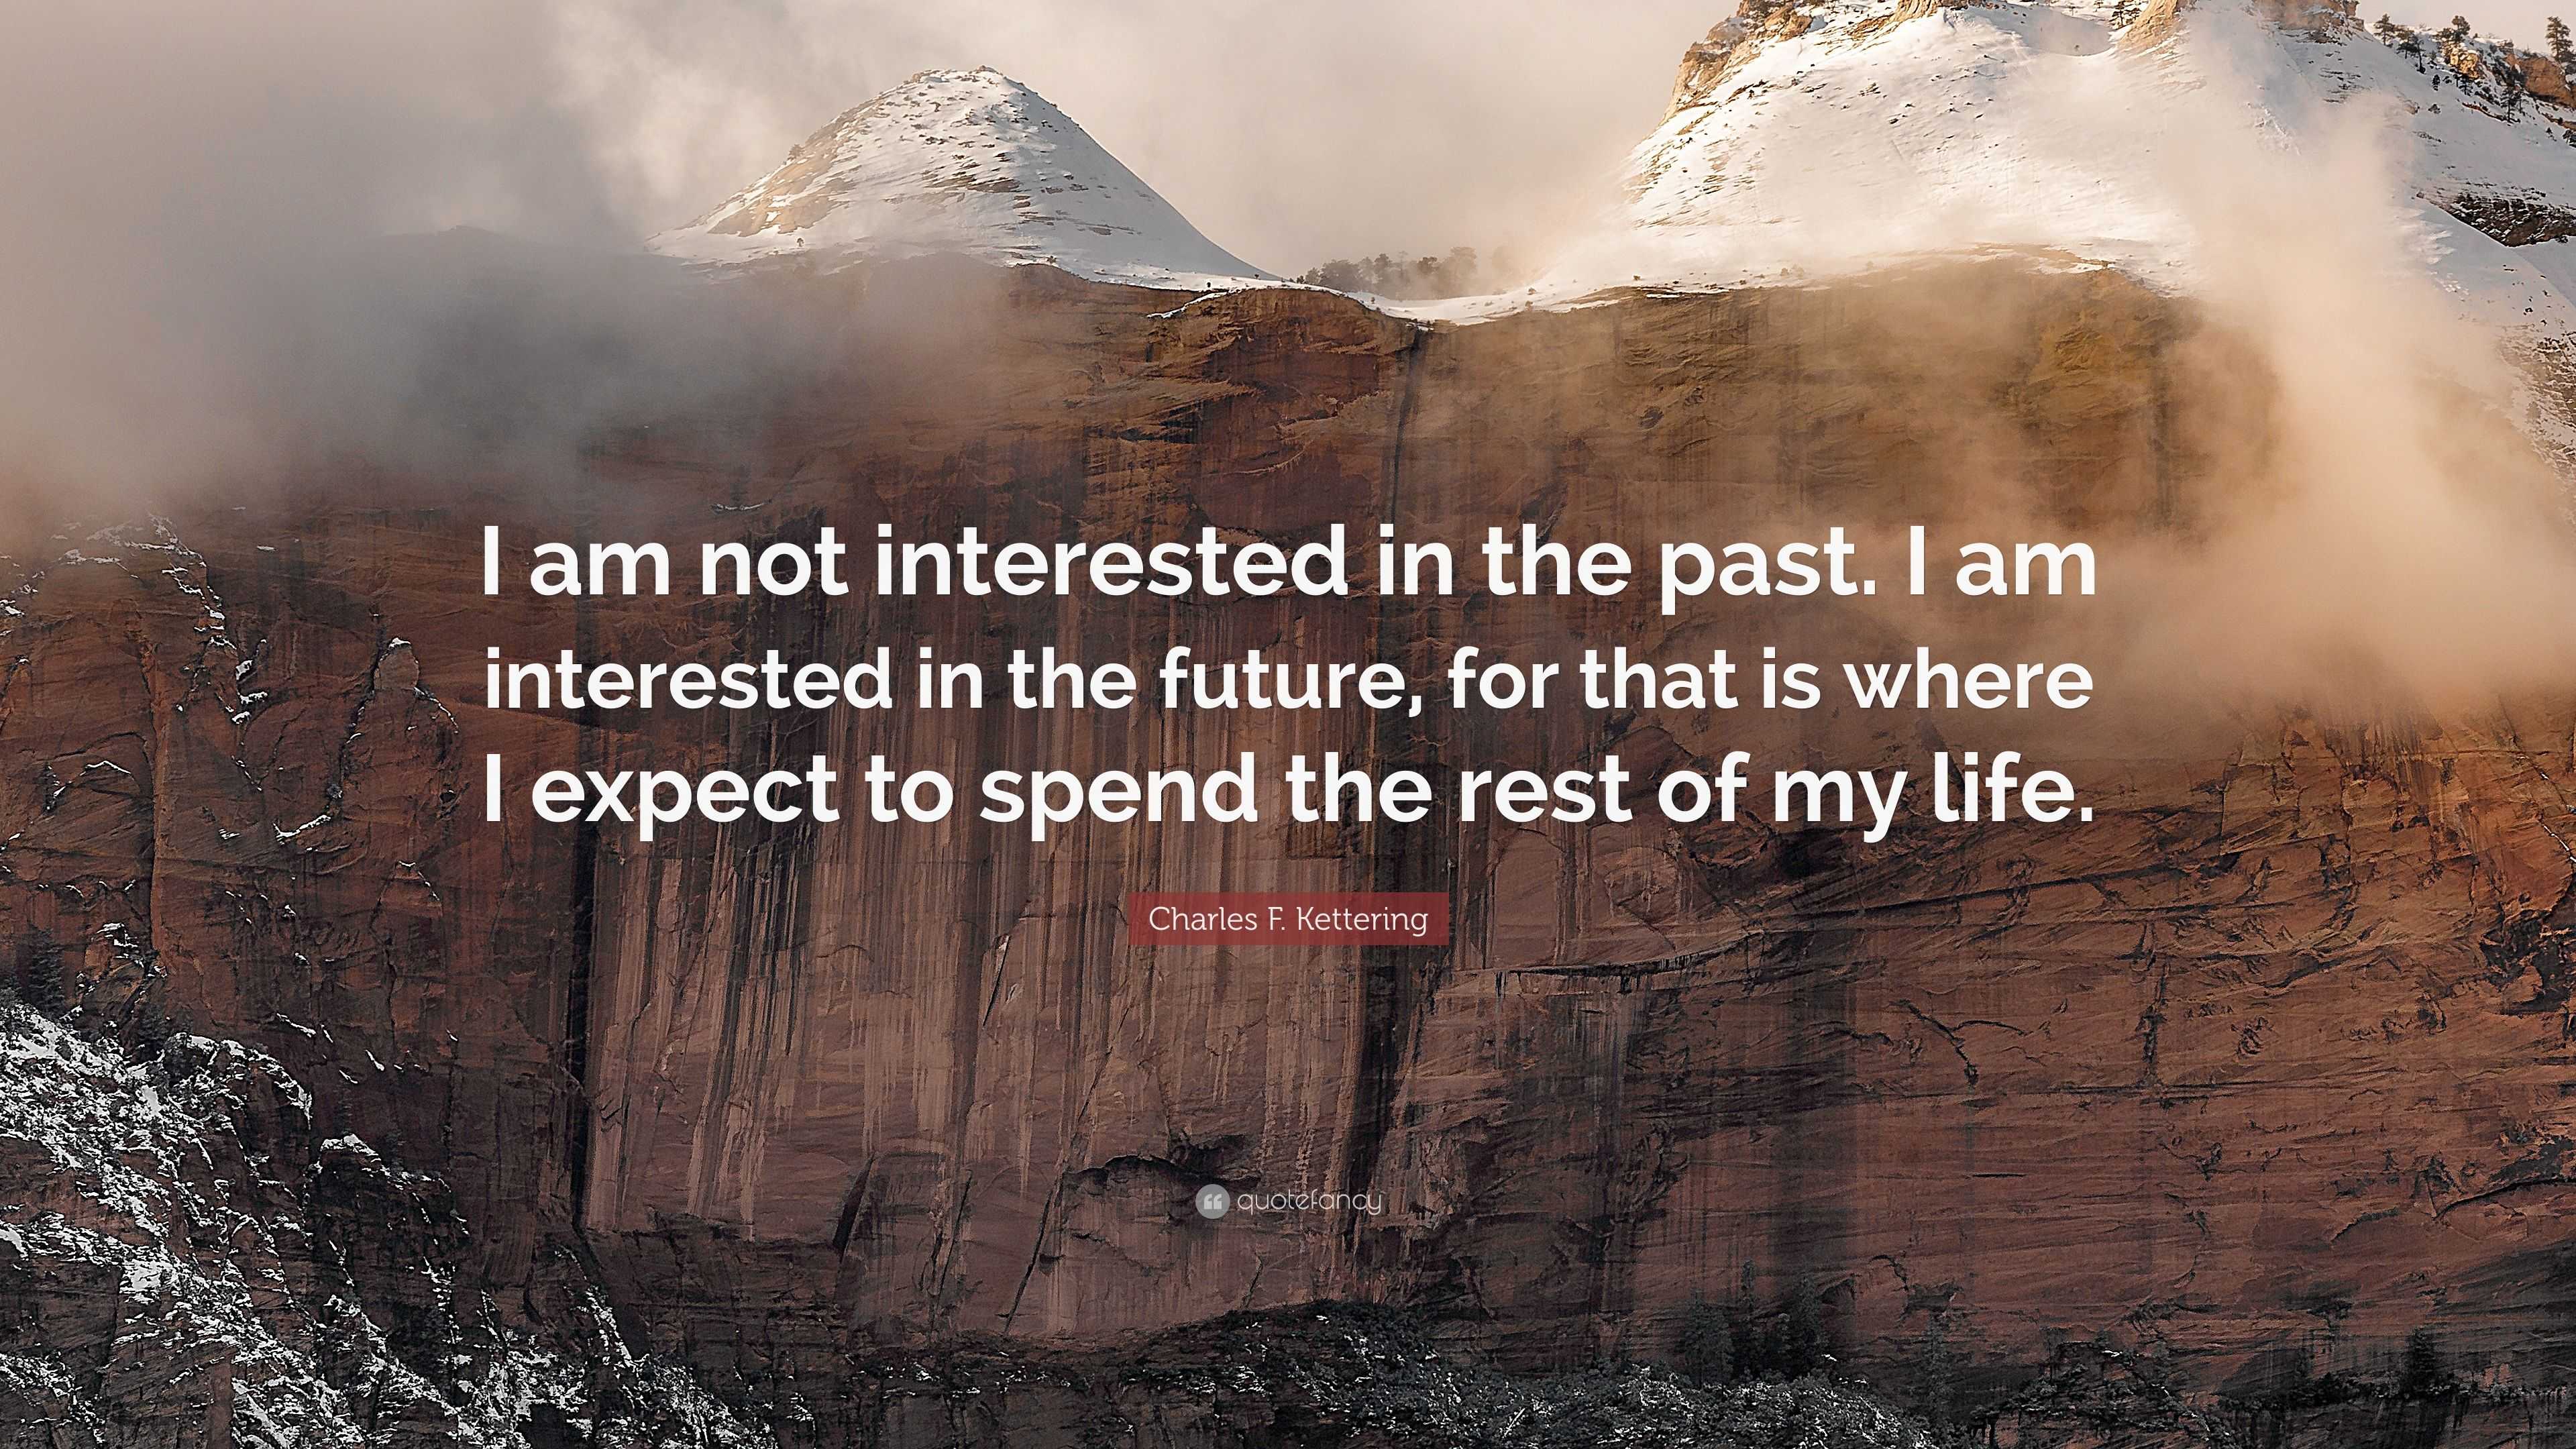 Charles F. Kettering Quote: “I am not interested in the past. I am ...